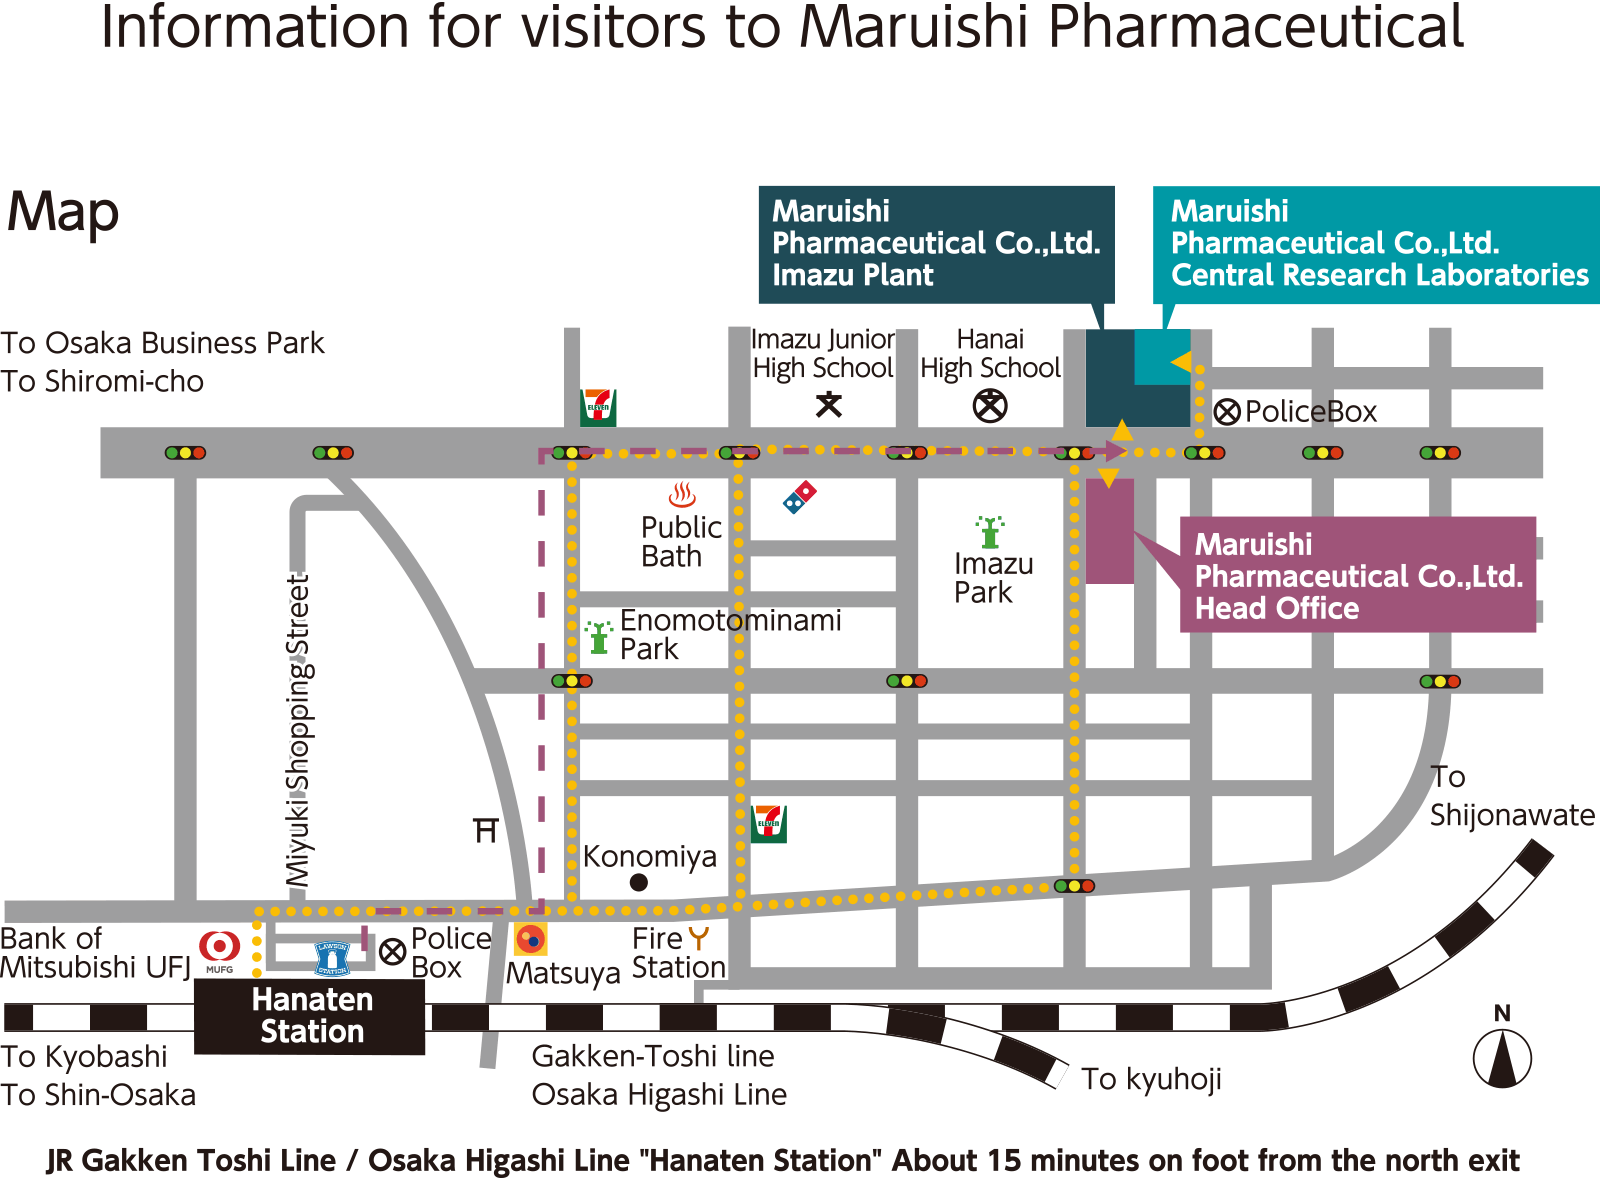 Information for Visitors to Maruishi Pharmaceutical